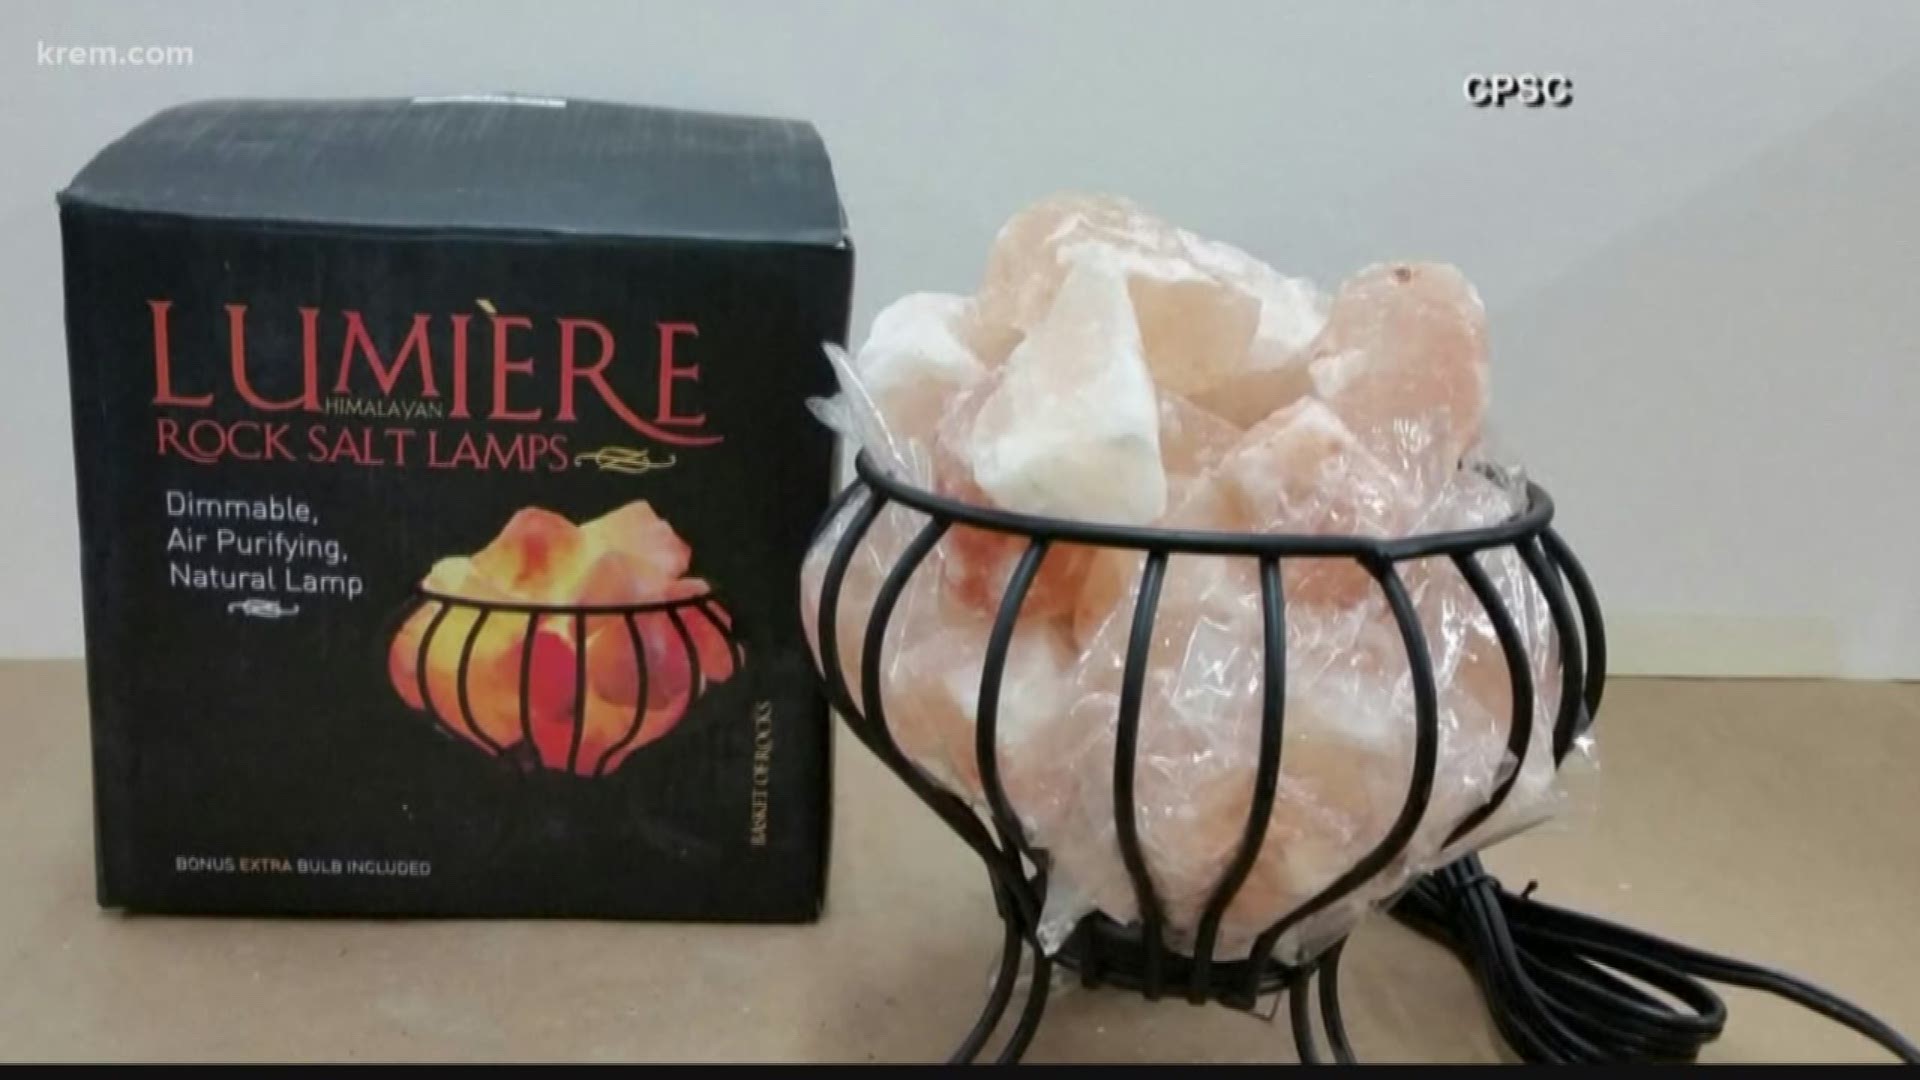 KREM 2's Rose Beltz takes a look at if salt lamps can really benefit your health.